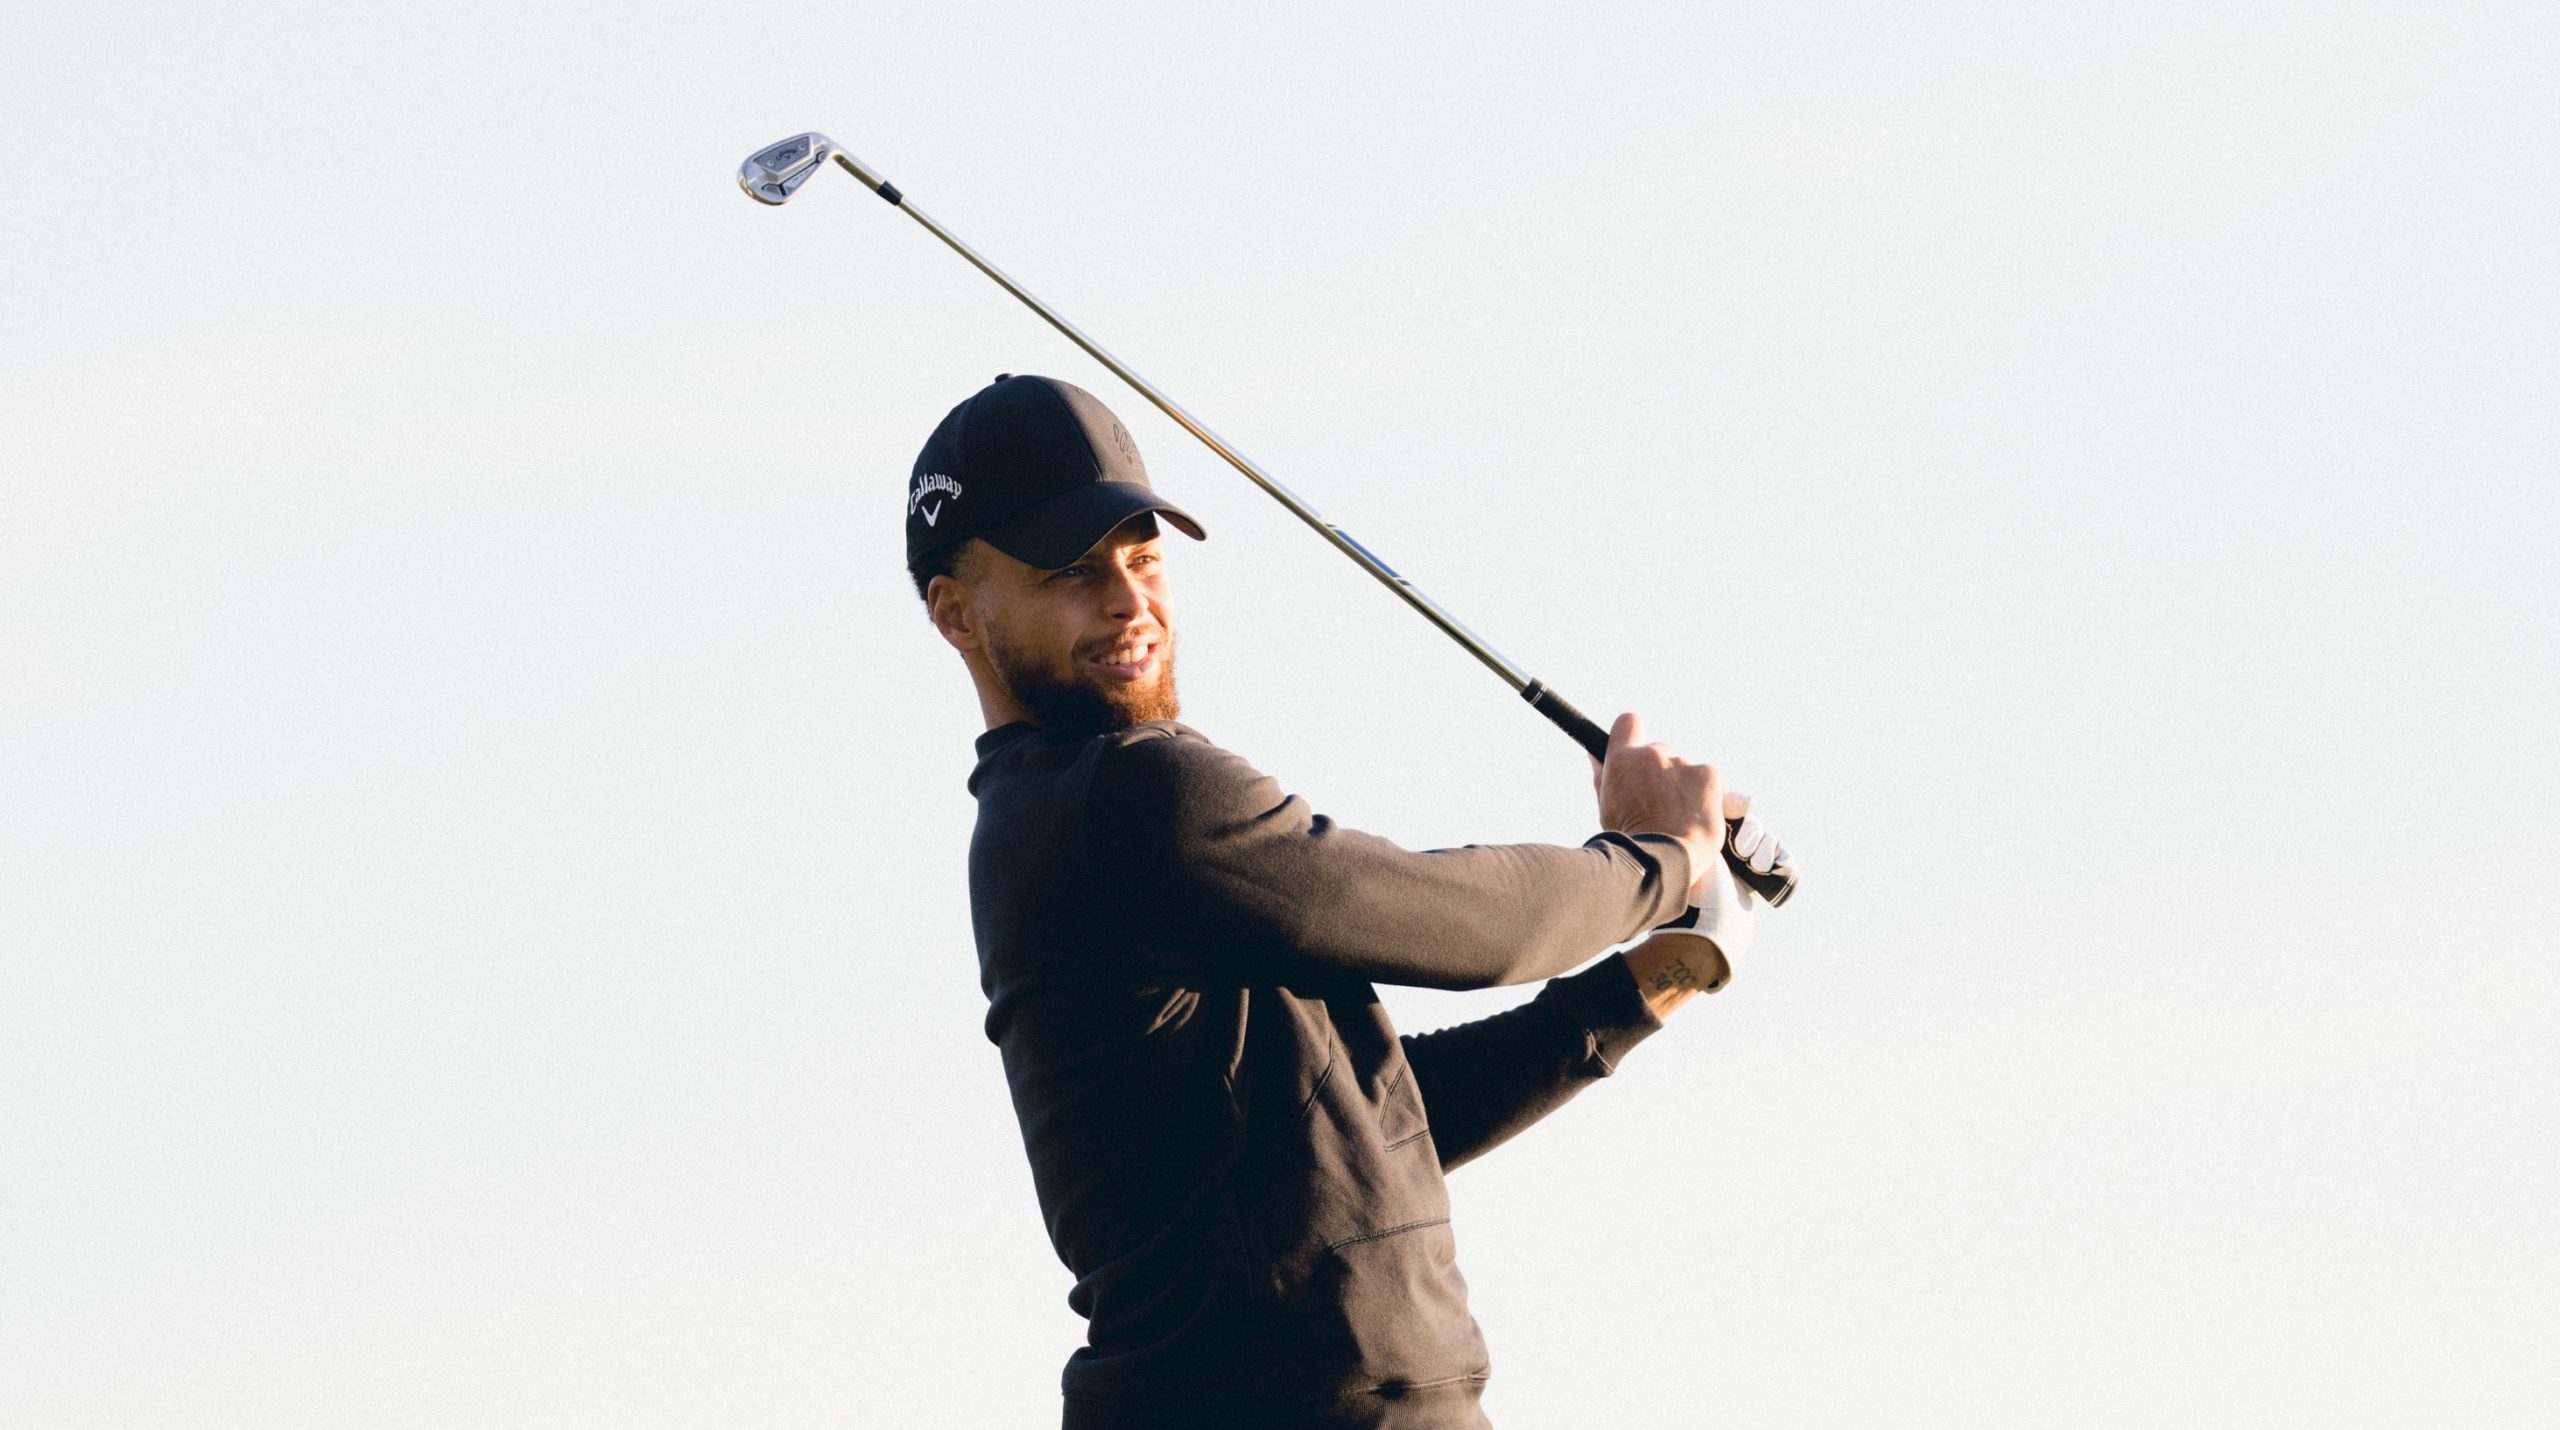 CALLAWAY GOLF AND STEPHEN CURRY ANNOUNCE MULTI-YEAR PARTNERSHIP EXTENSION